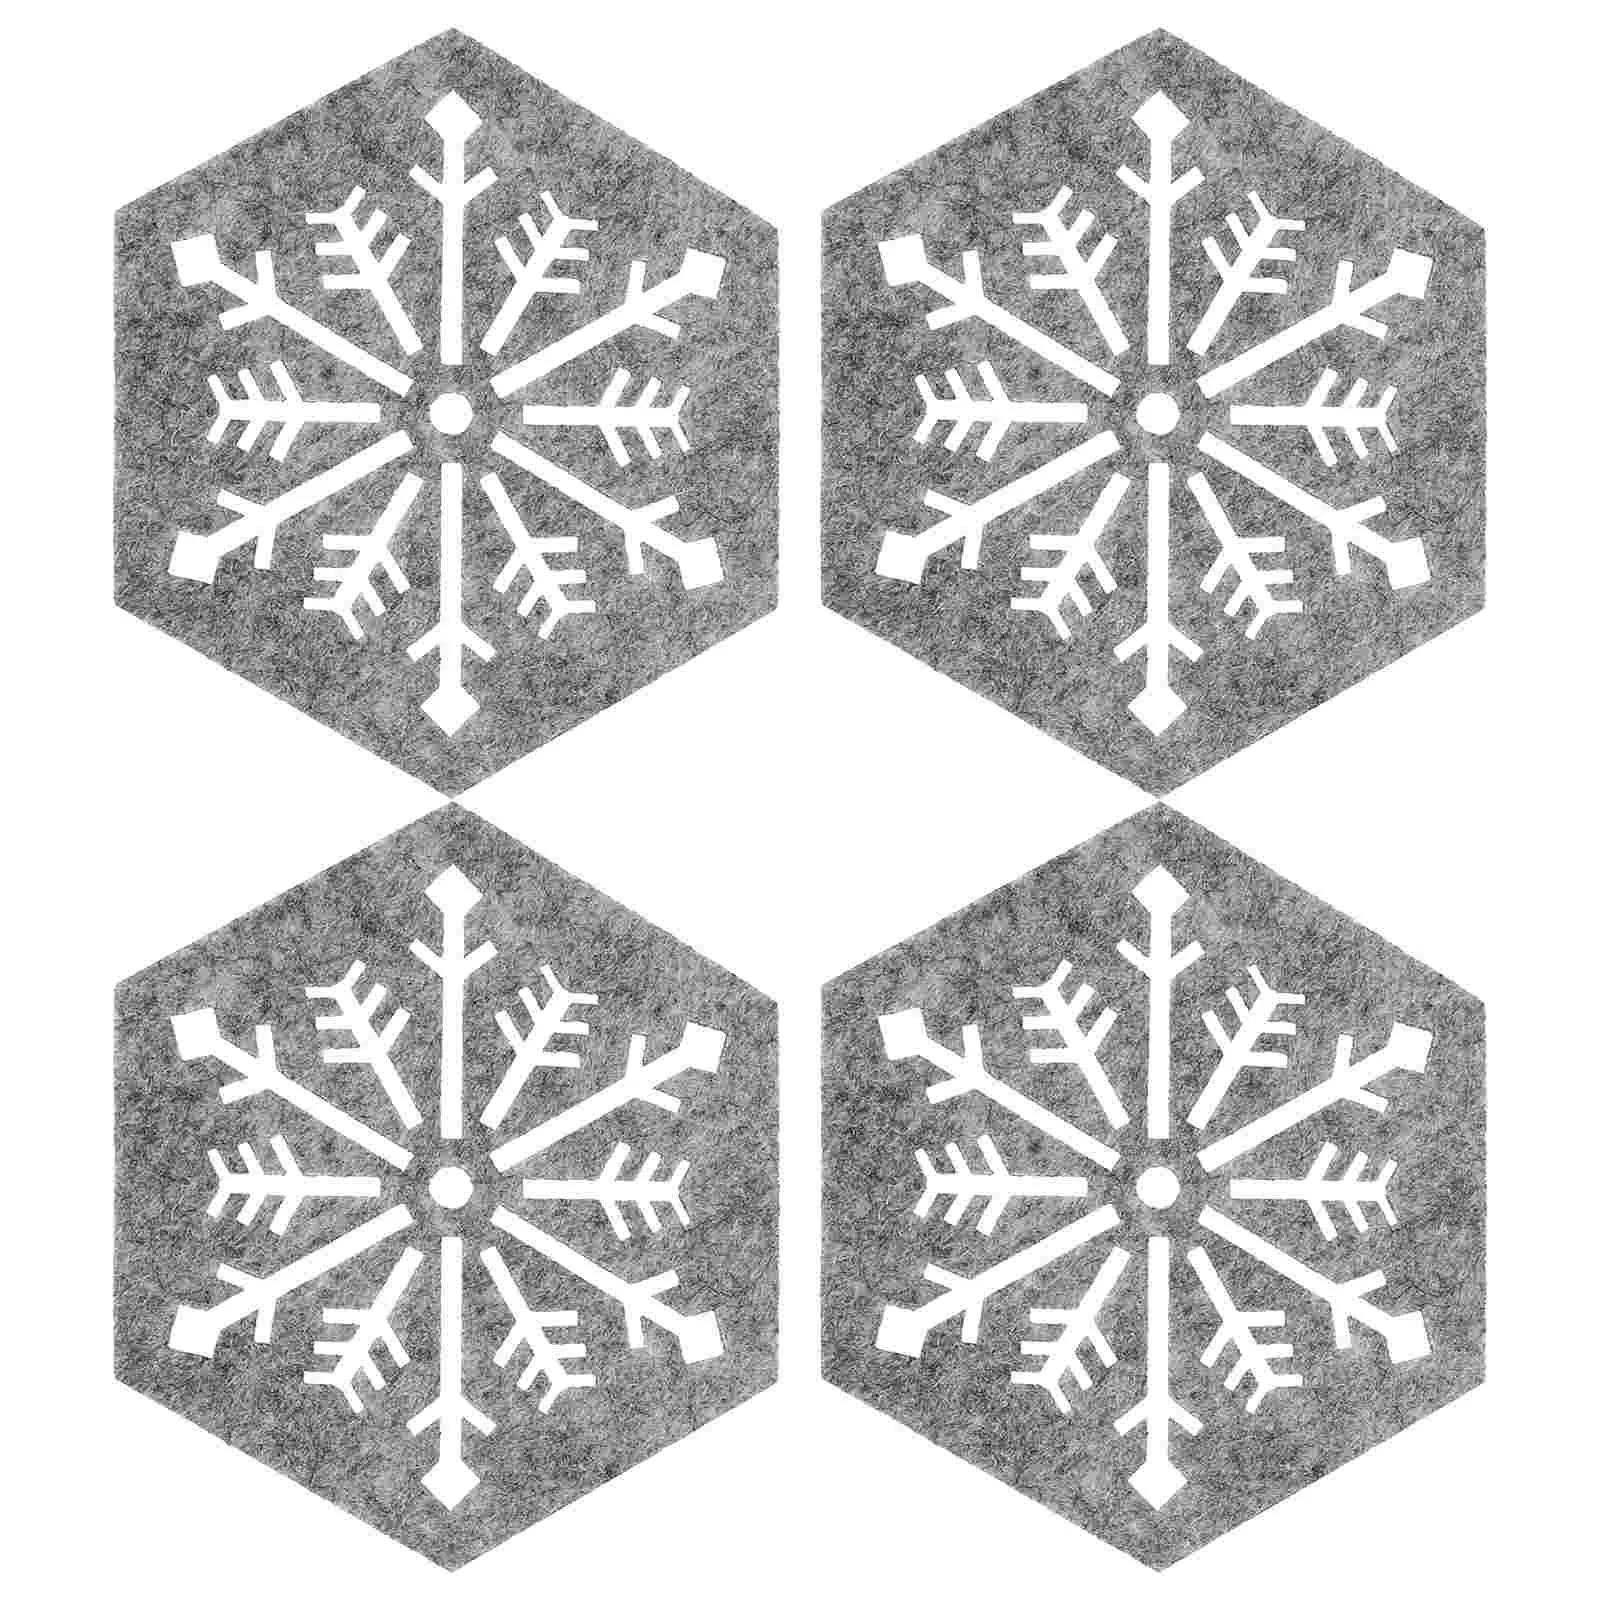 

4 Pcs Christmas Ornament Snowflake Table Mats Placemats Non-slip Themed Cloth Hexagon Xmas Party Supplies Pattern Cup